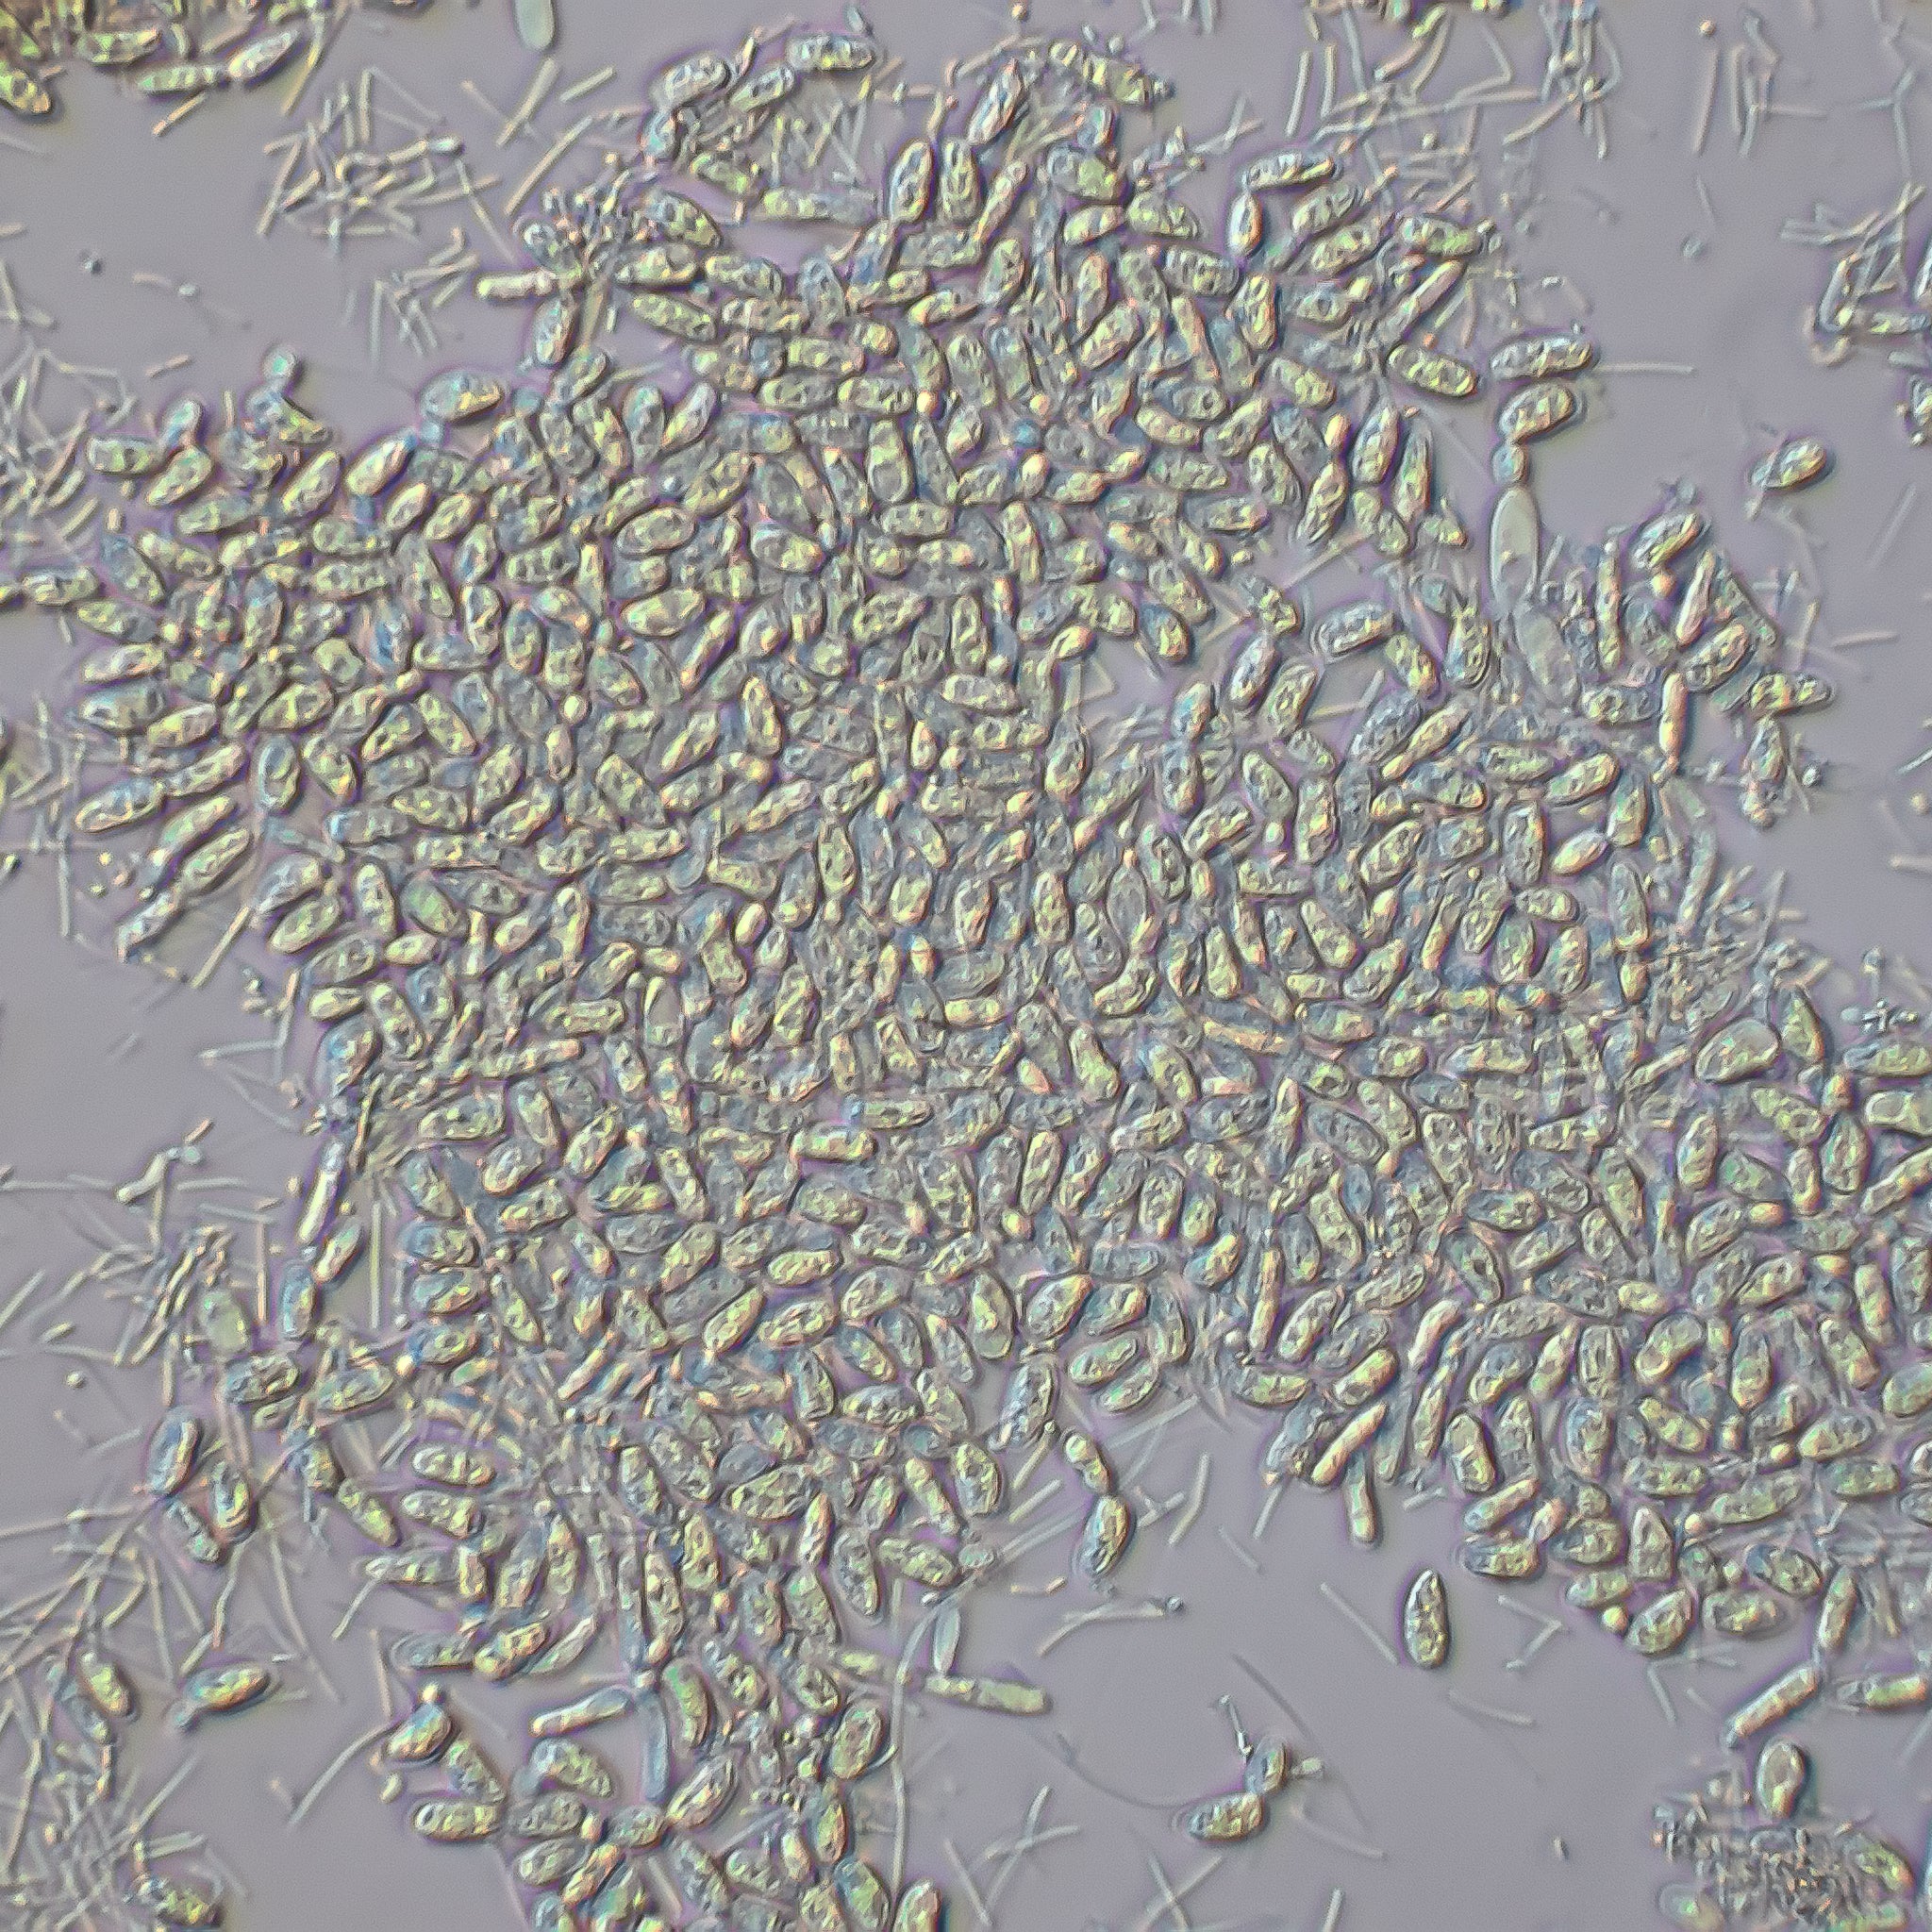 magnification of microbz sustain showing the living microbes 